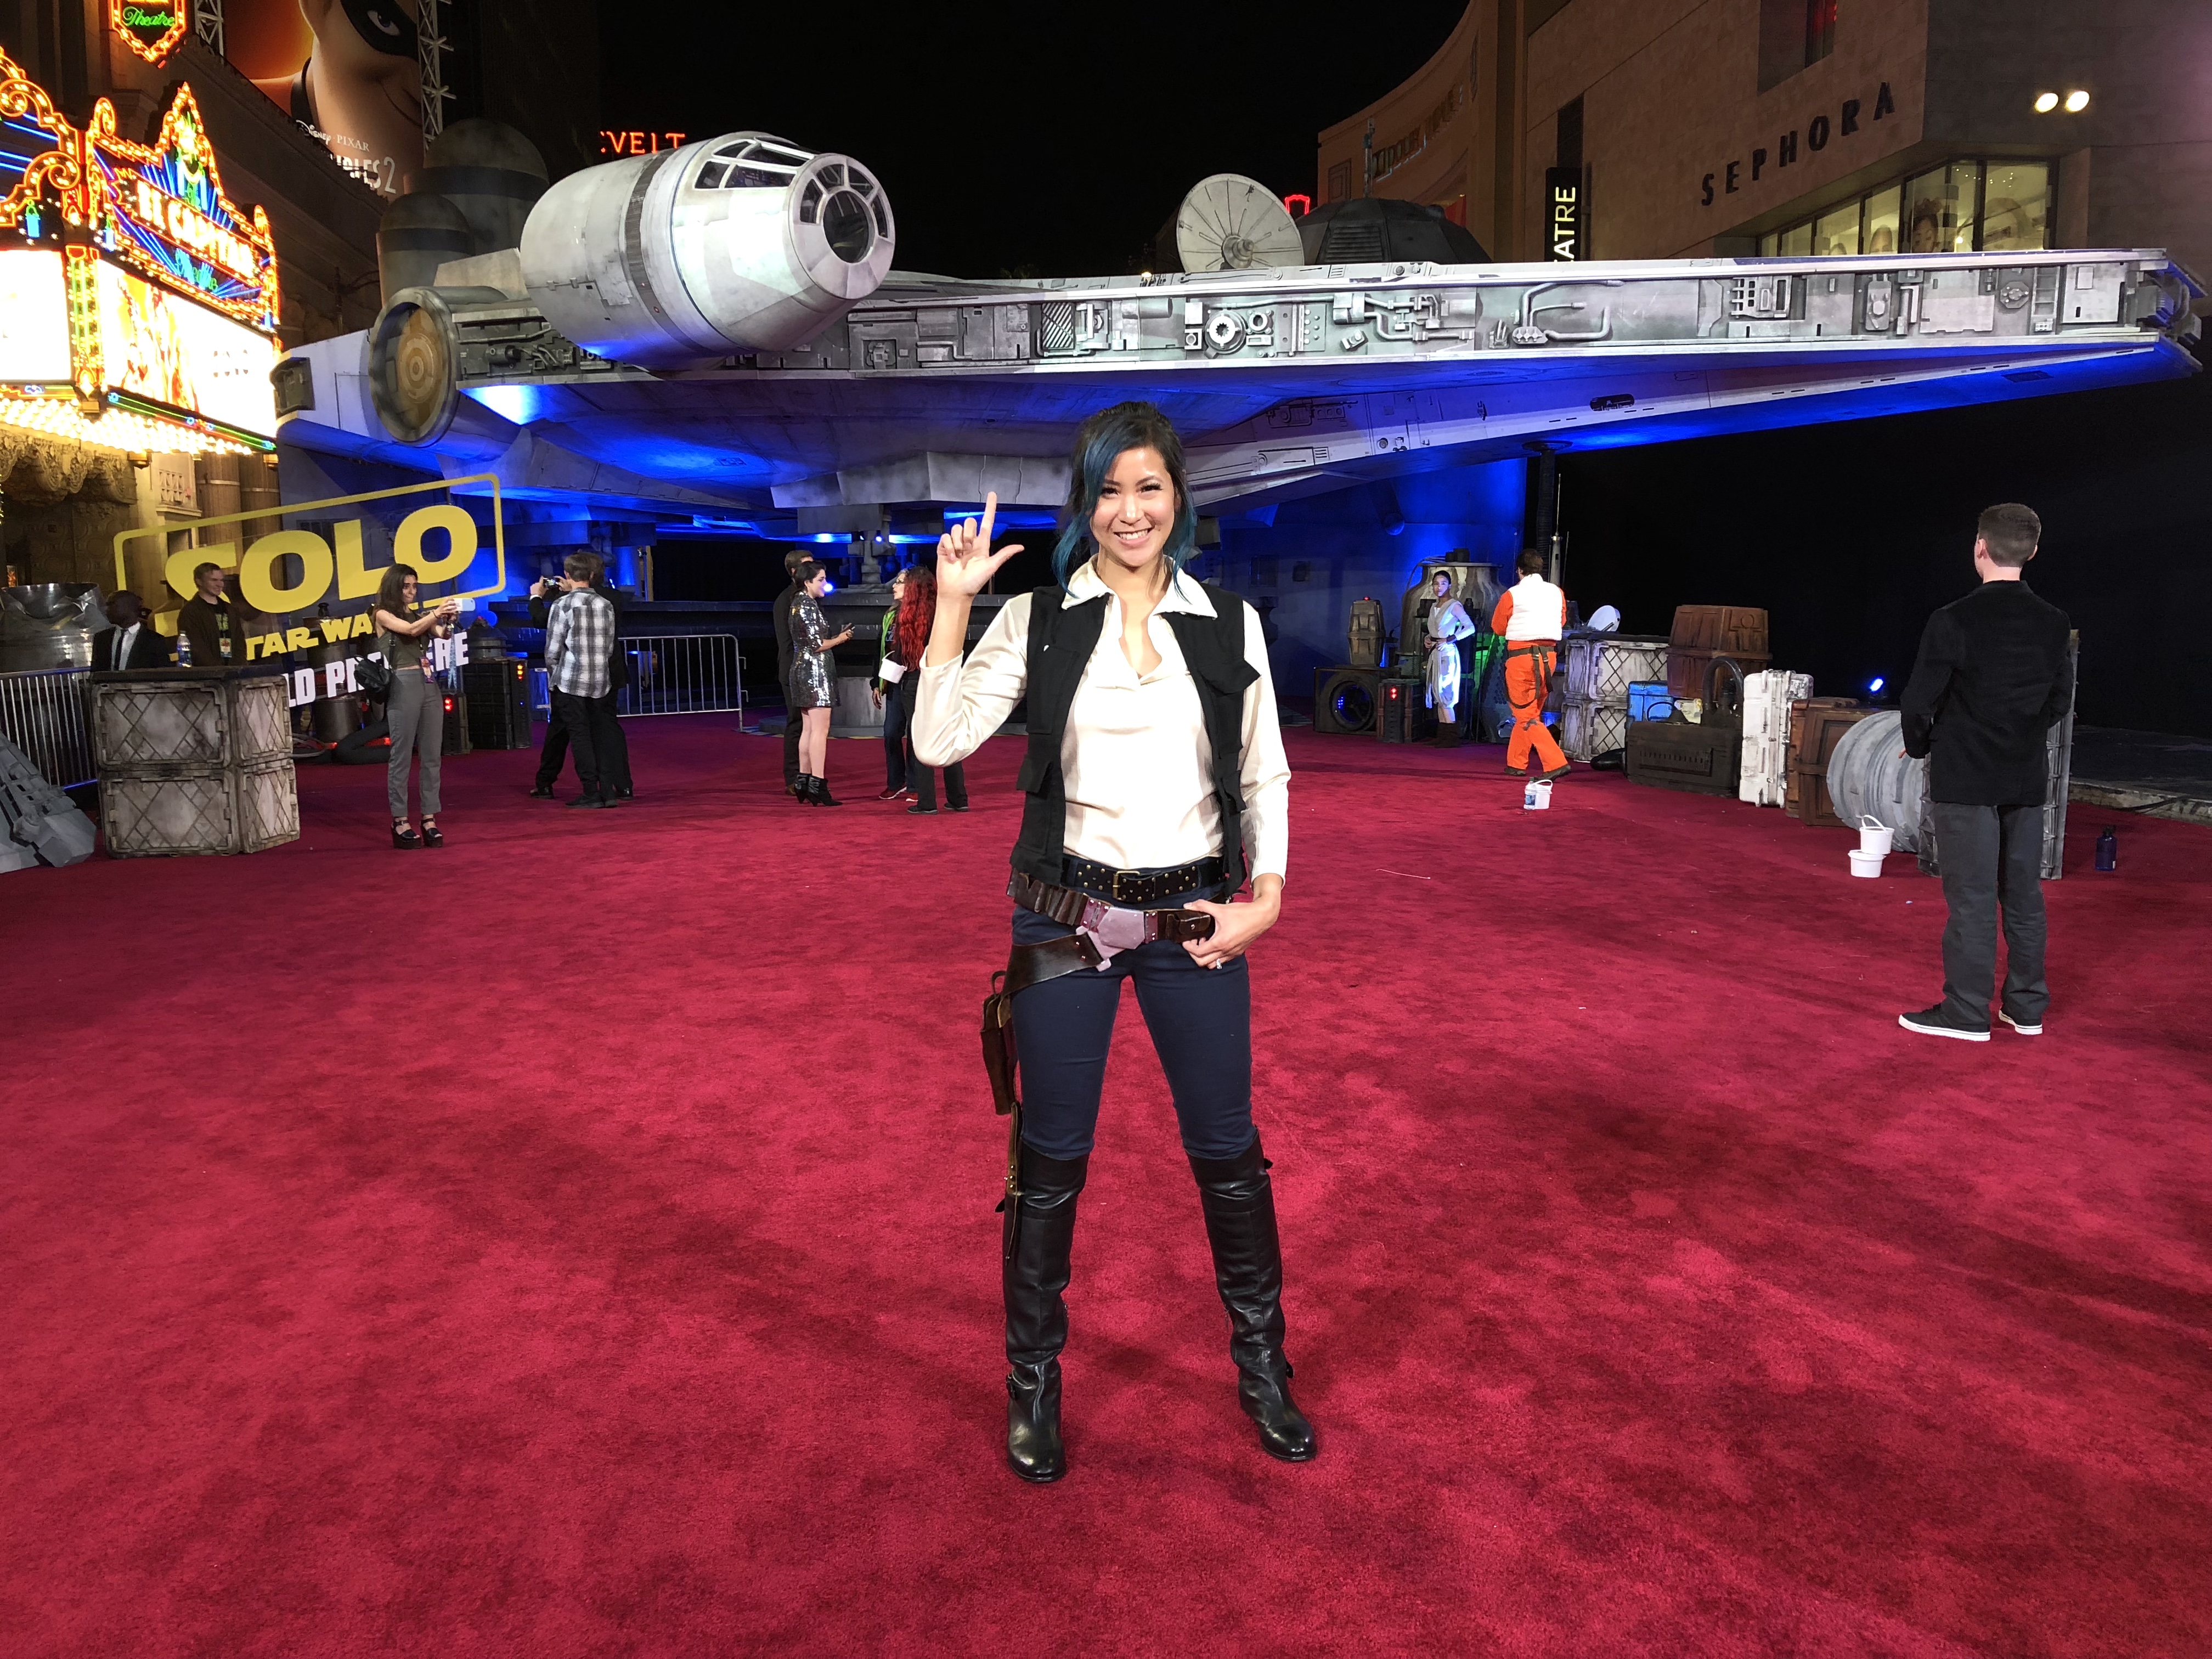 Solo Star Wars Story Red Carpet Premiere